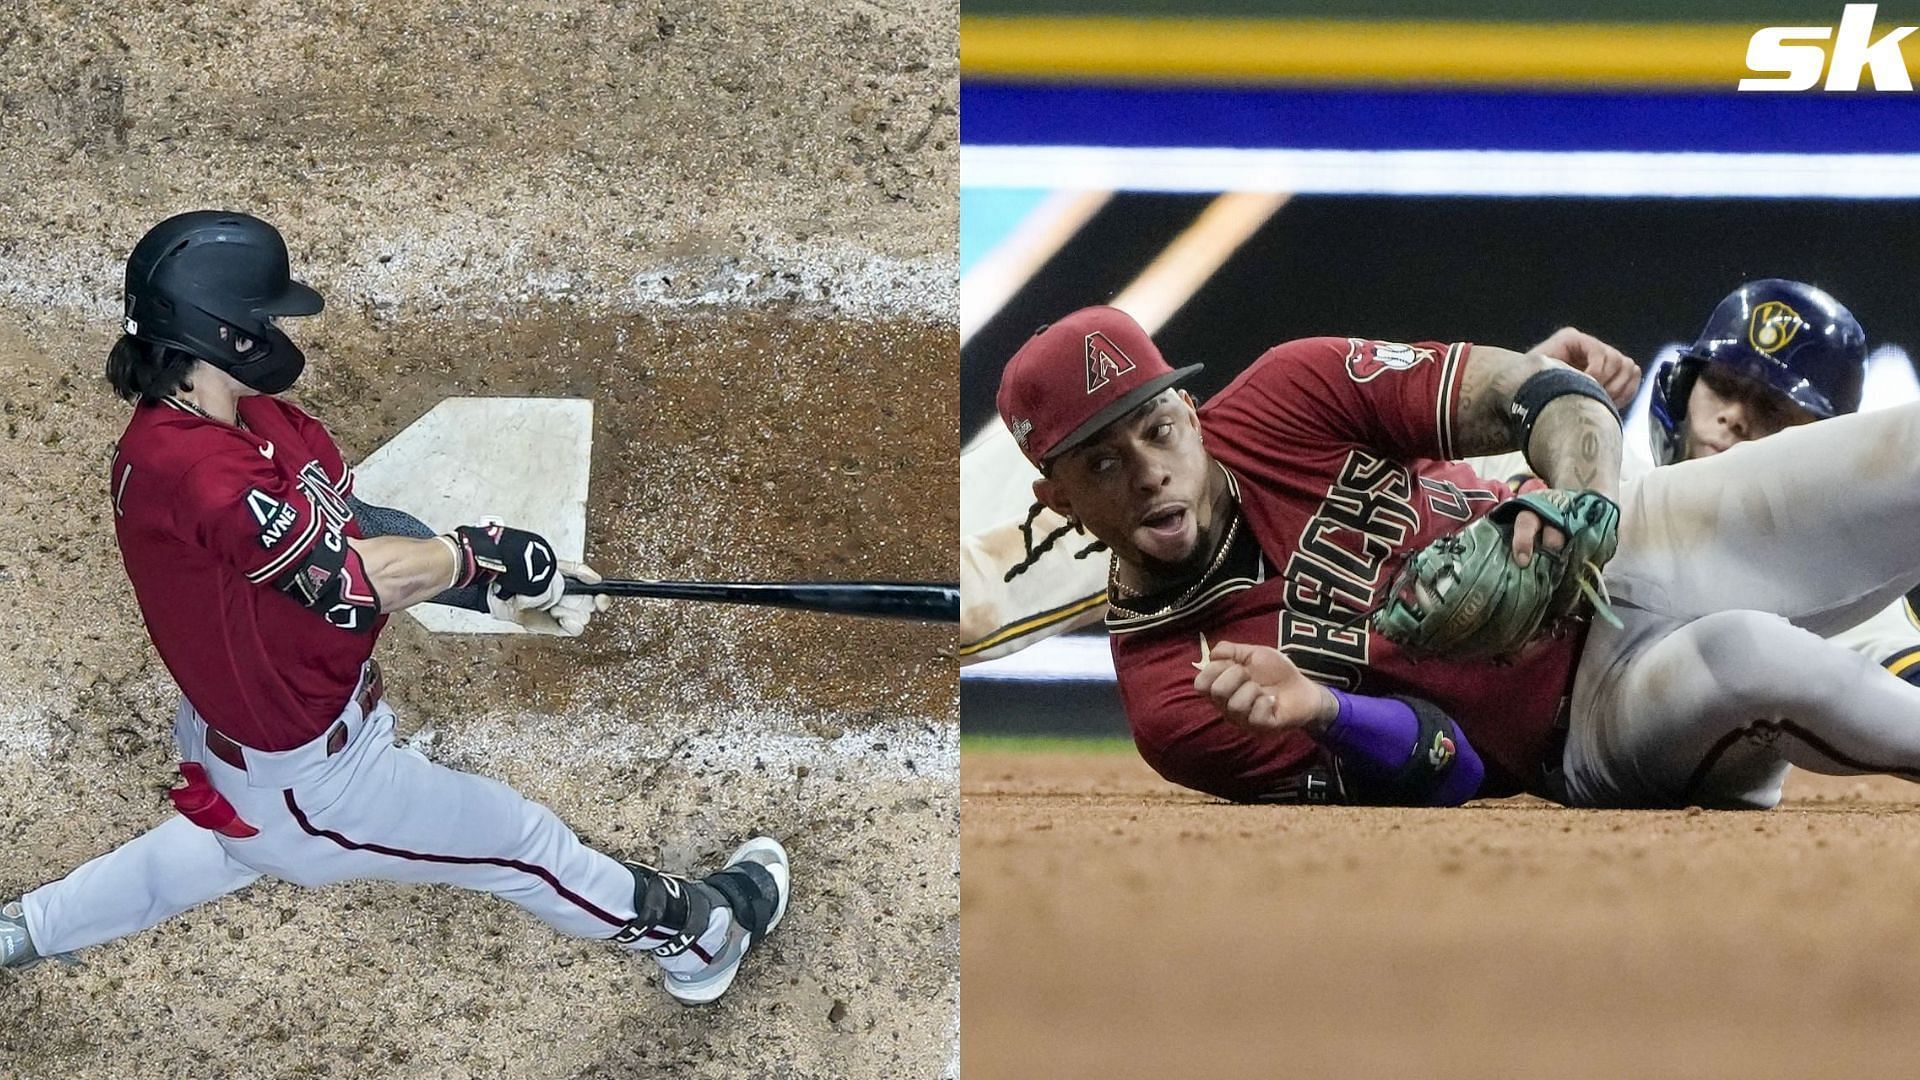 Torey Lovullo expects strong Brewers riposte after Diamondbacks early Wild Card lead - &quot;They